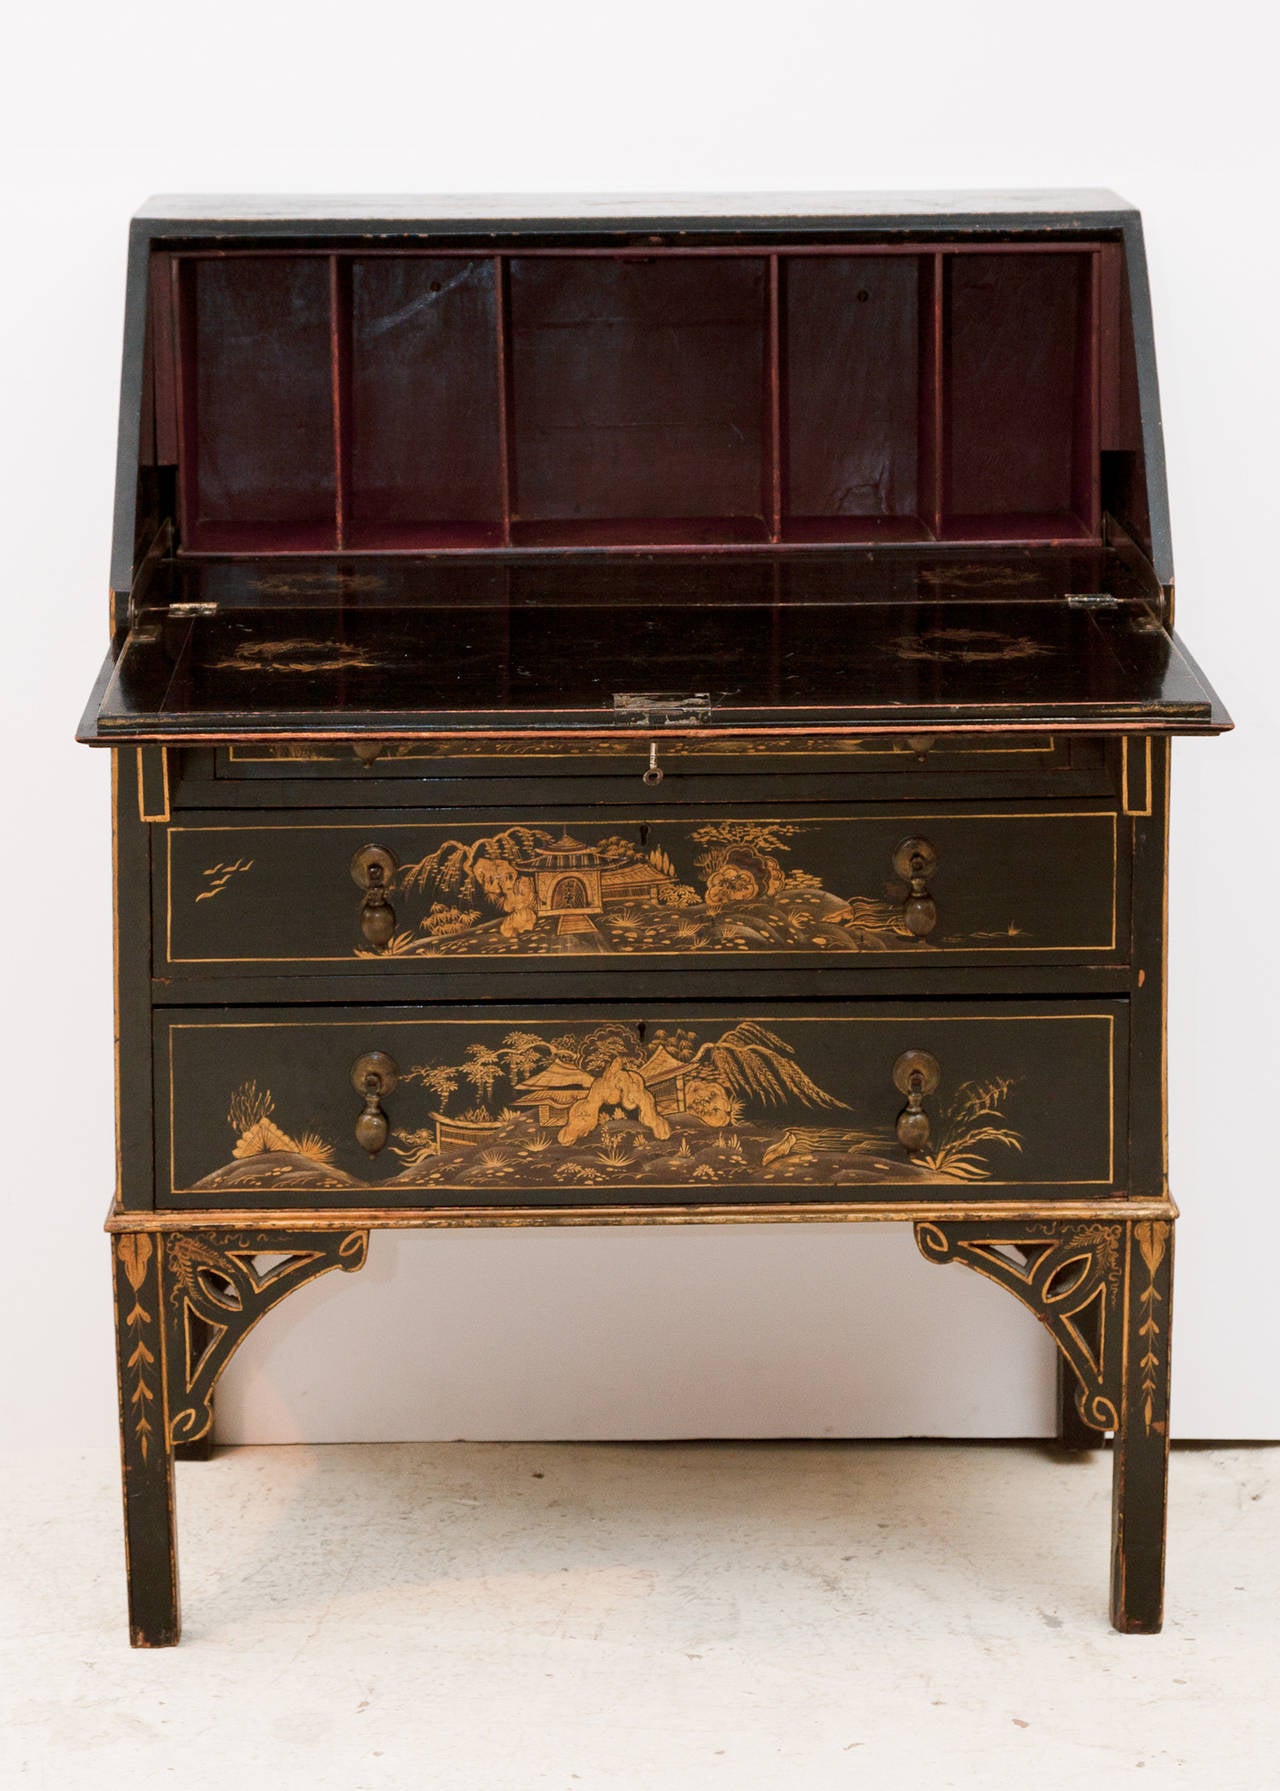 English 19th Century Lacquered Chinoiserie Fall Front Bureau or Desk